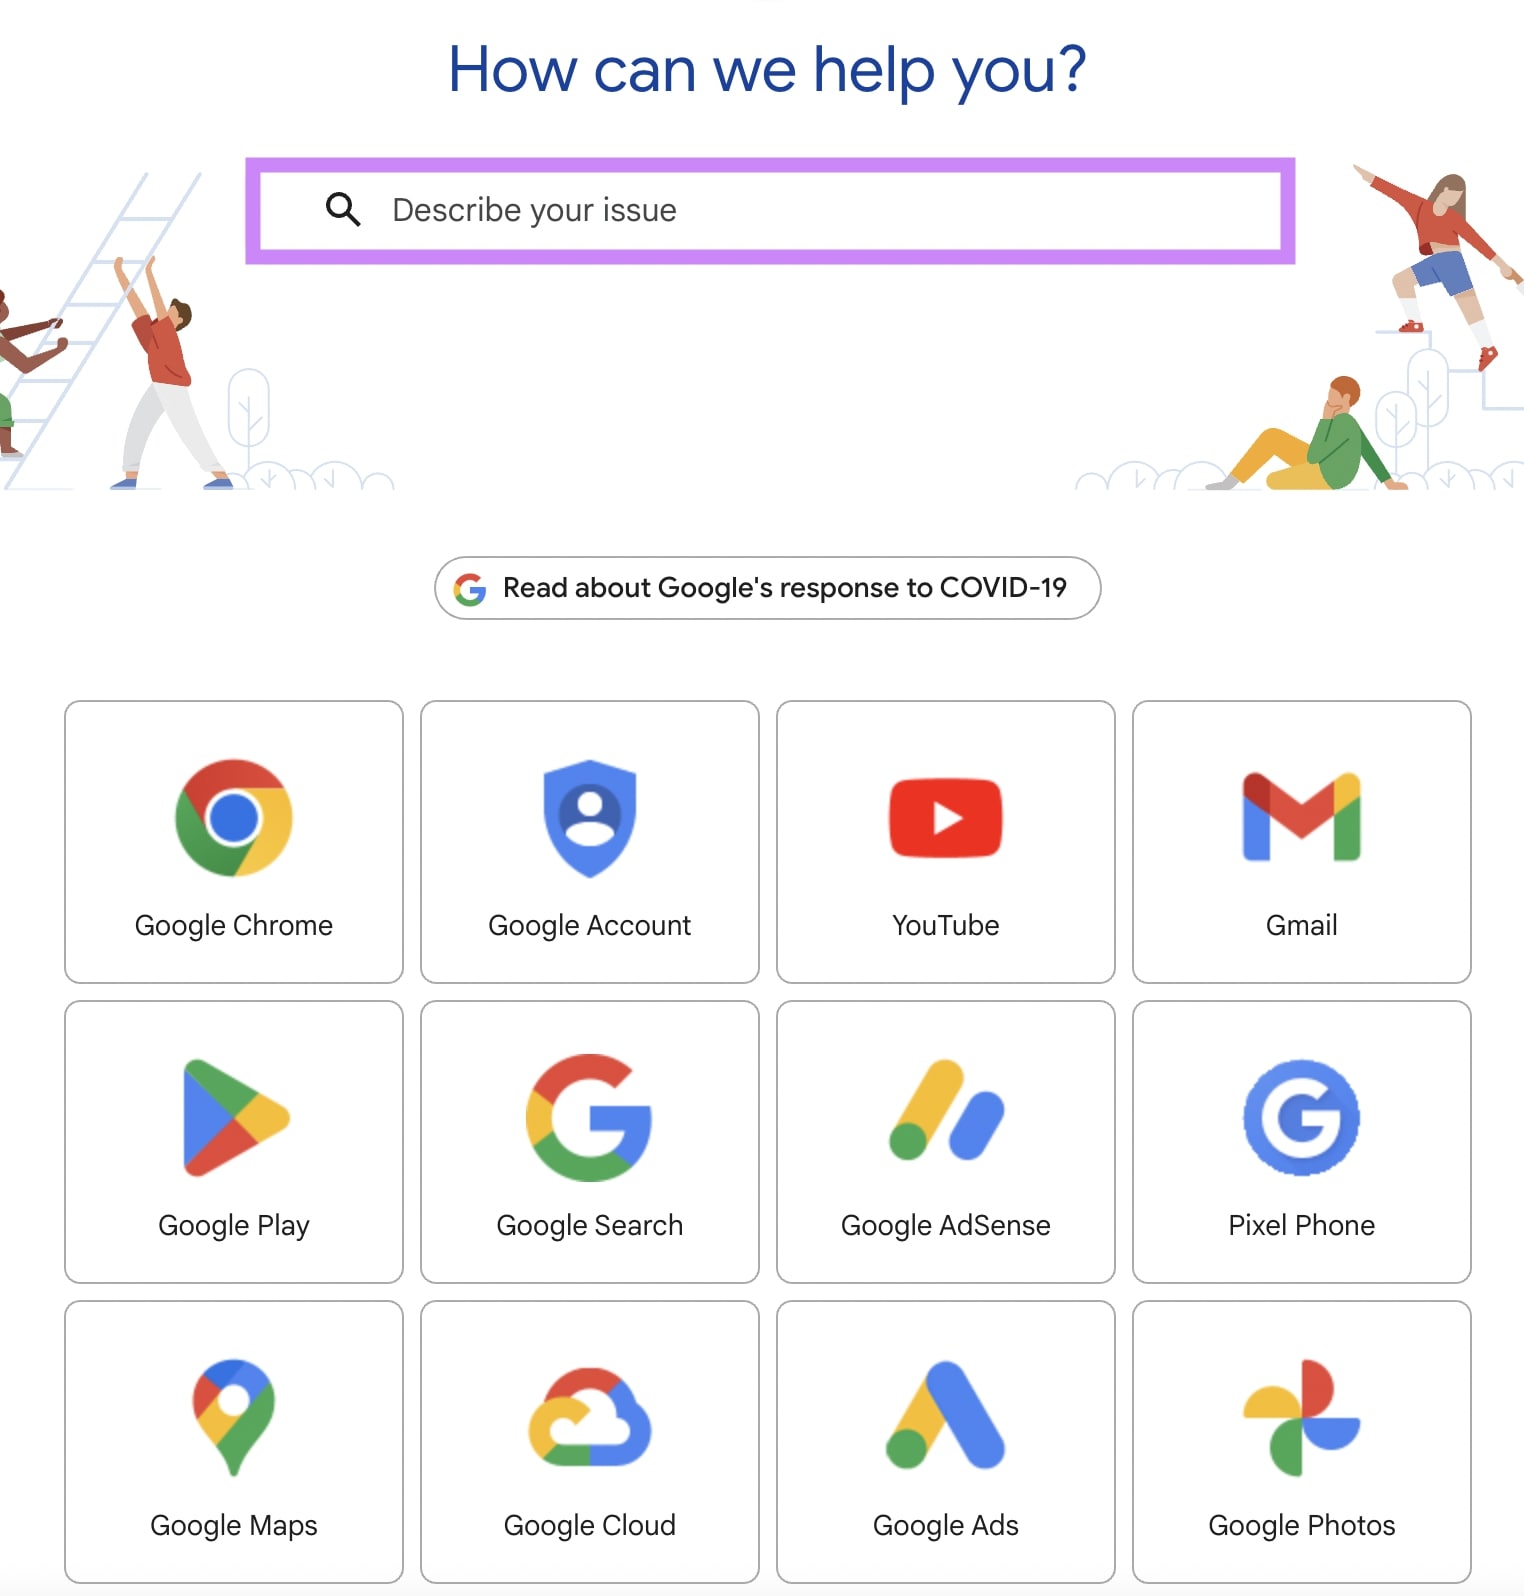 Google’s "How can we help you?" FAQ page